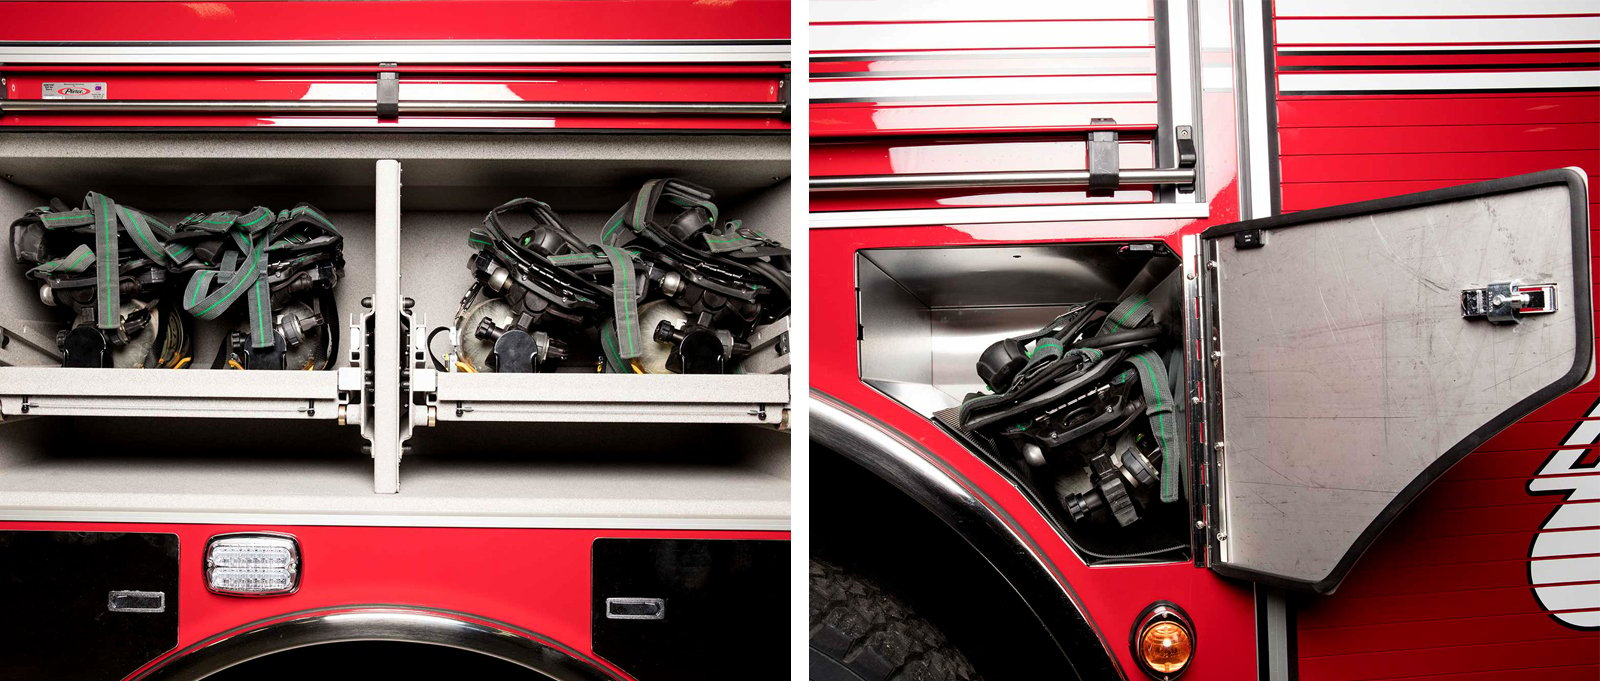 An image collage of two images show exterior storage compartments on a red fire truck, which are holding SCBA equipment. 